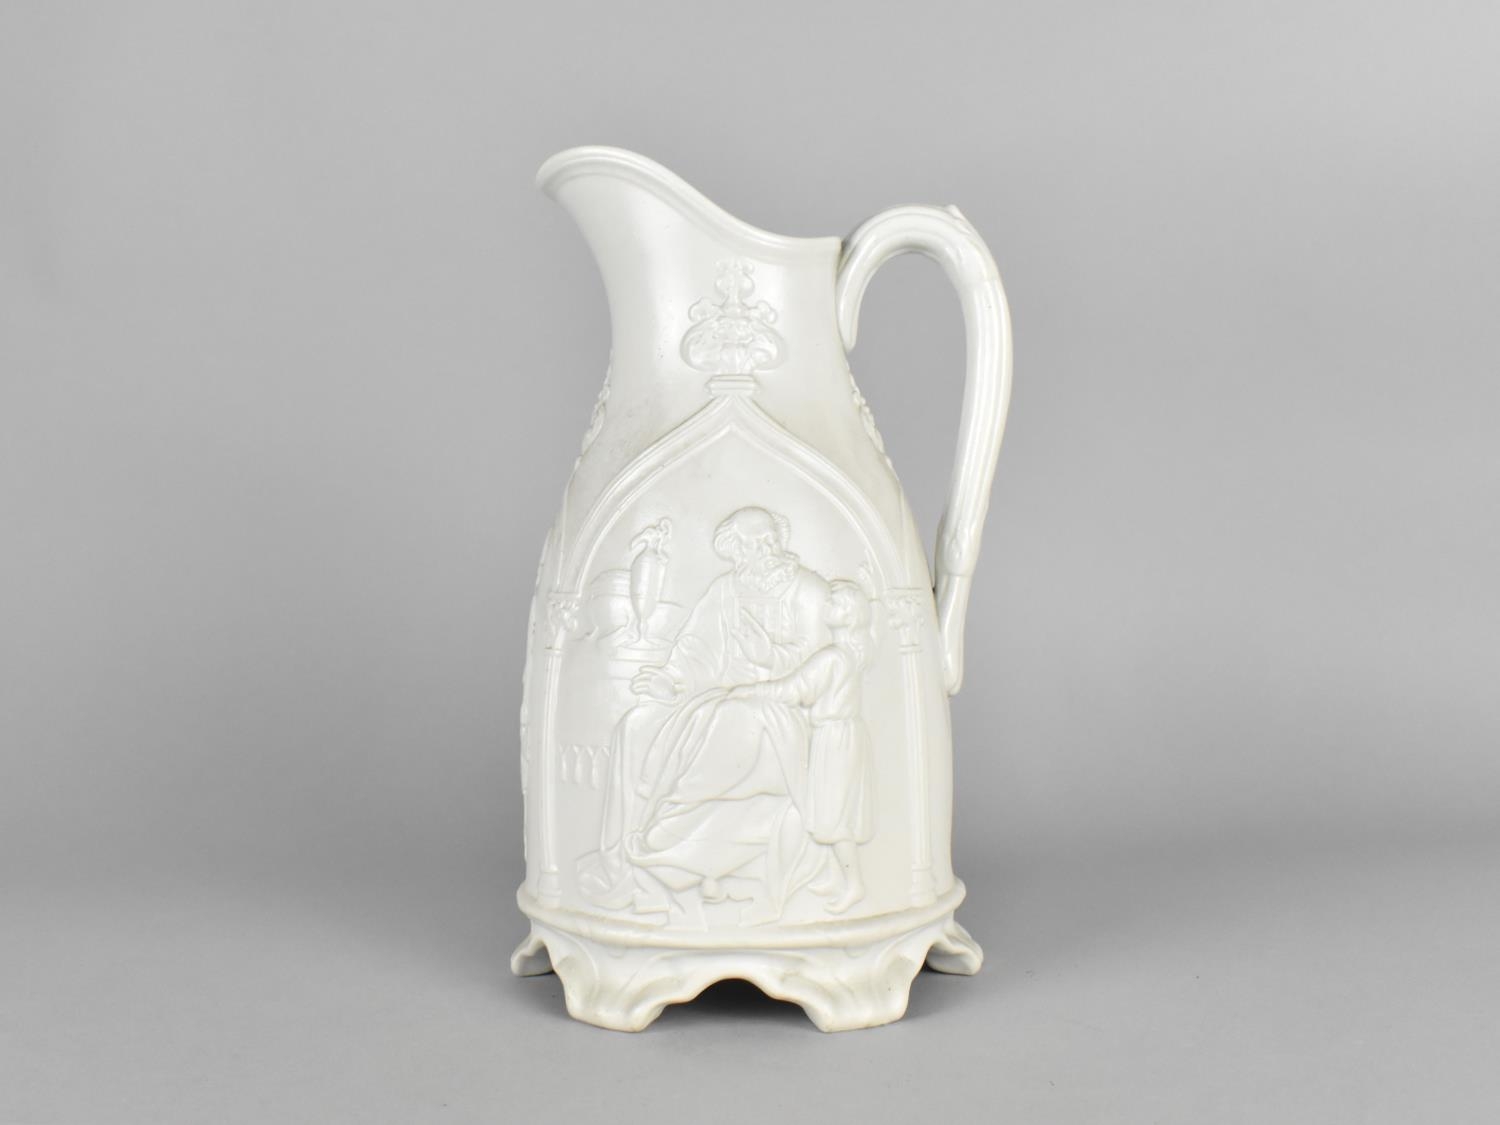 A 19th Century Relief Jug Decorated with Figures, 22.5cm high - Image 2 of 3